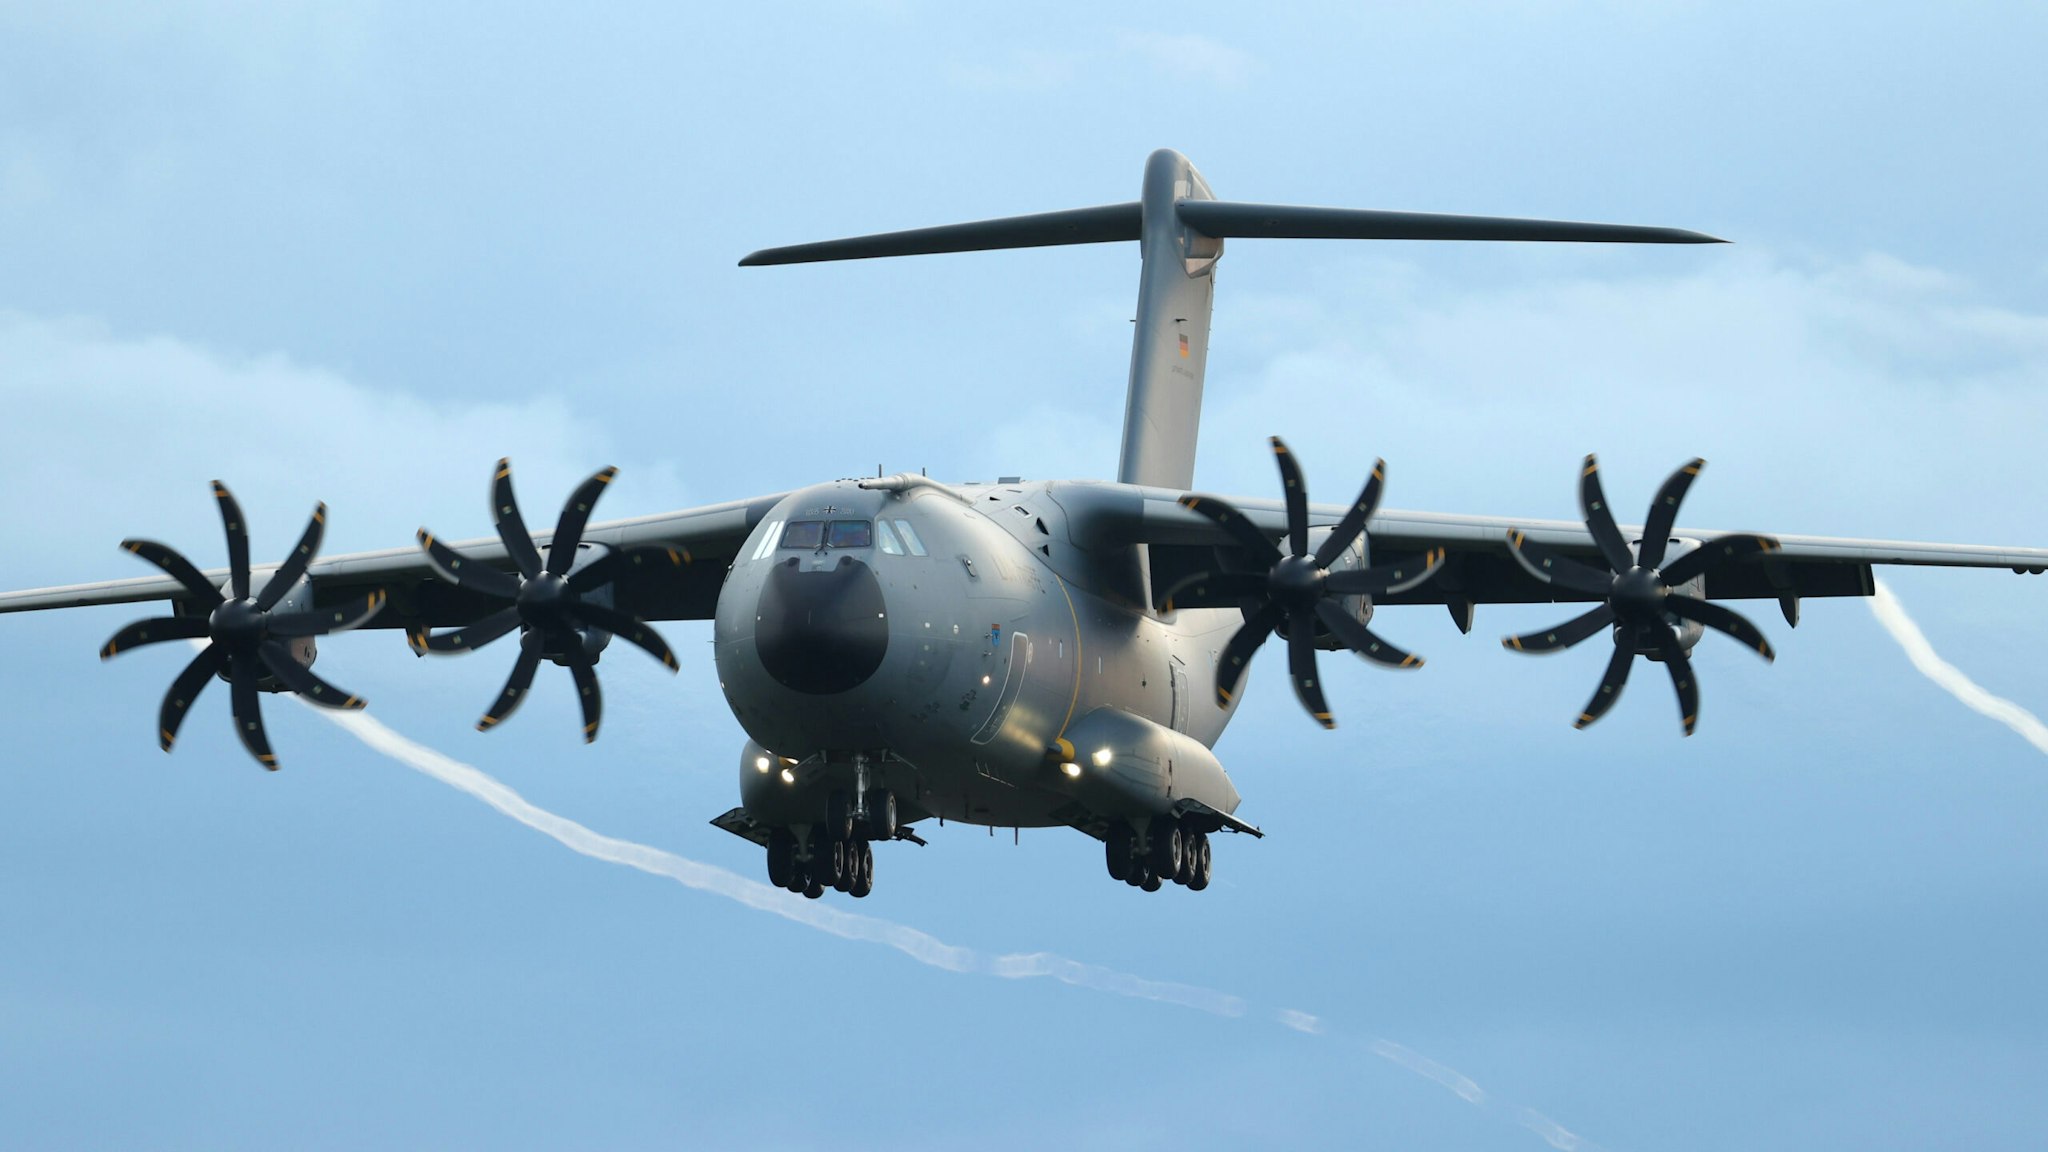 27 August 2021, Lower Saxony, Wunstorf: The Bundeswehr's A400M transport aircraft is on approach to land at the Wunstorf base in Lower Saxony. The first Bundeswehr soldiers have returned to Germany from their evacuation mission in Afghanistan. Three military planes landed at the Wunstorf airbase near Hanover shortly before 8:00 p.m. on Friday evening. An Airbus A310 of the German Air Force and two military transporters A400M were used for the return flight of the soldiers to Germany. The forces had taken off from Tashkent, the capital of Uzbekistan. The Bundeswehr had set up a hub there to fly Germans and threatened Afghans out of Kabul in short shuttle flights.